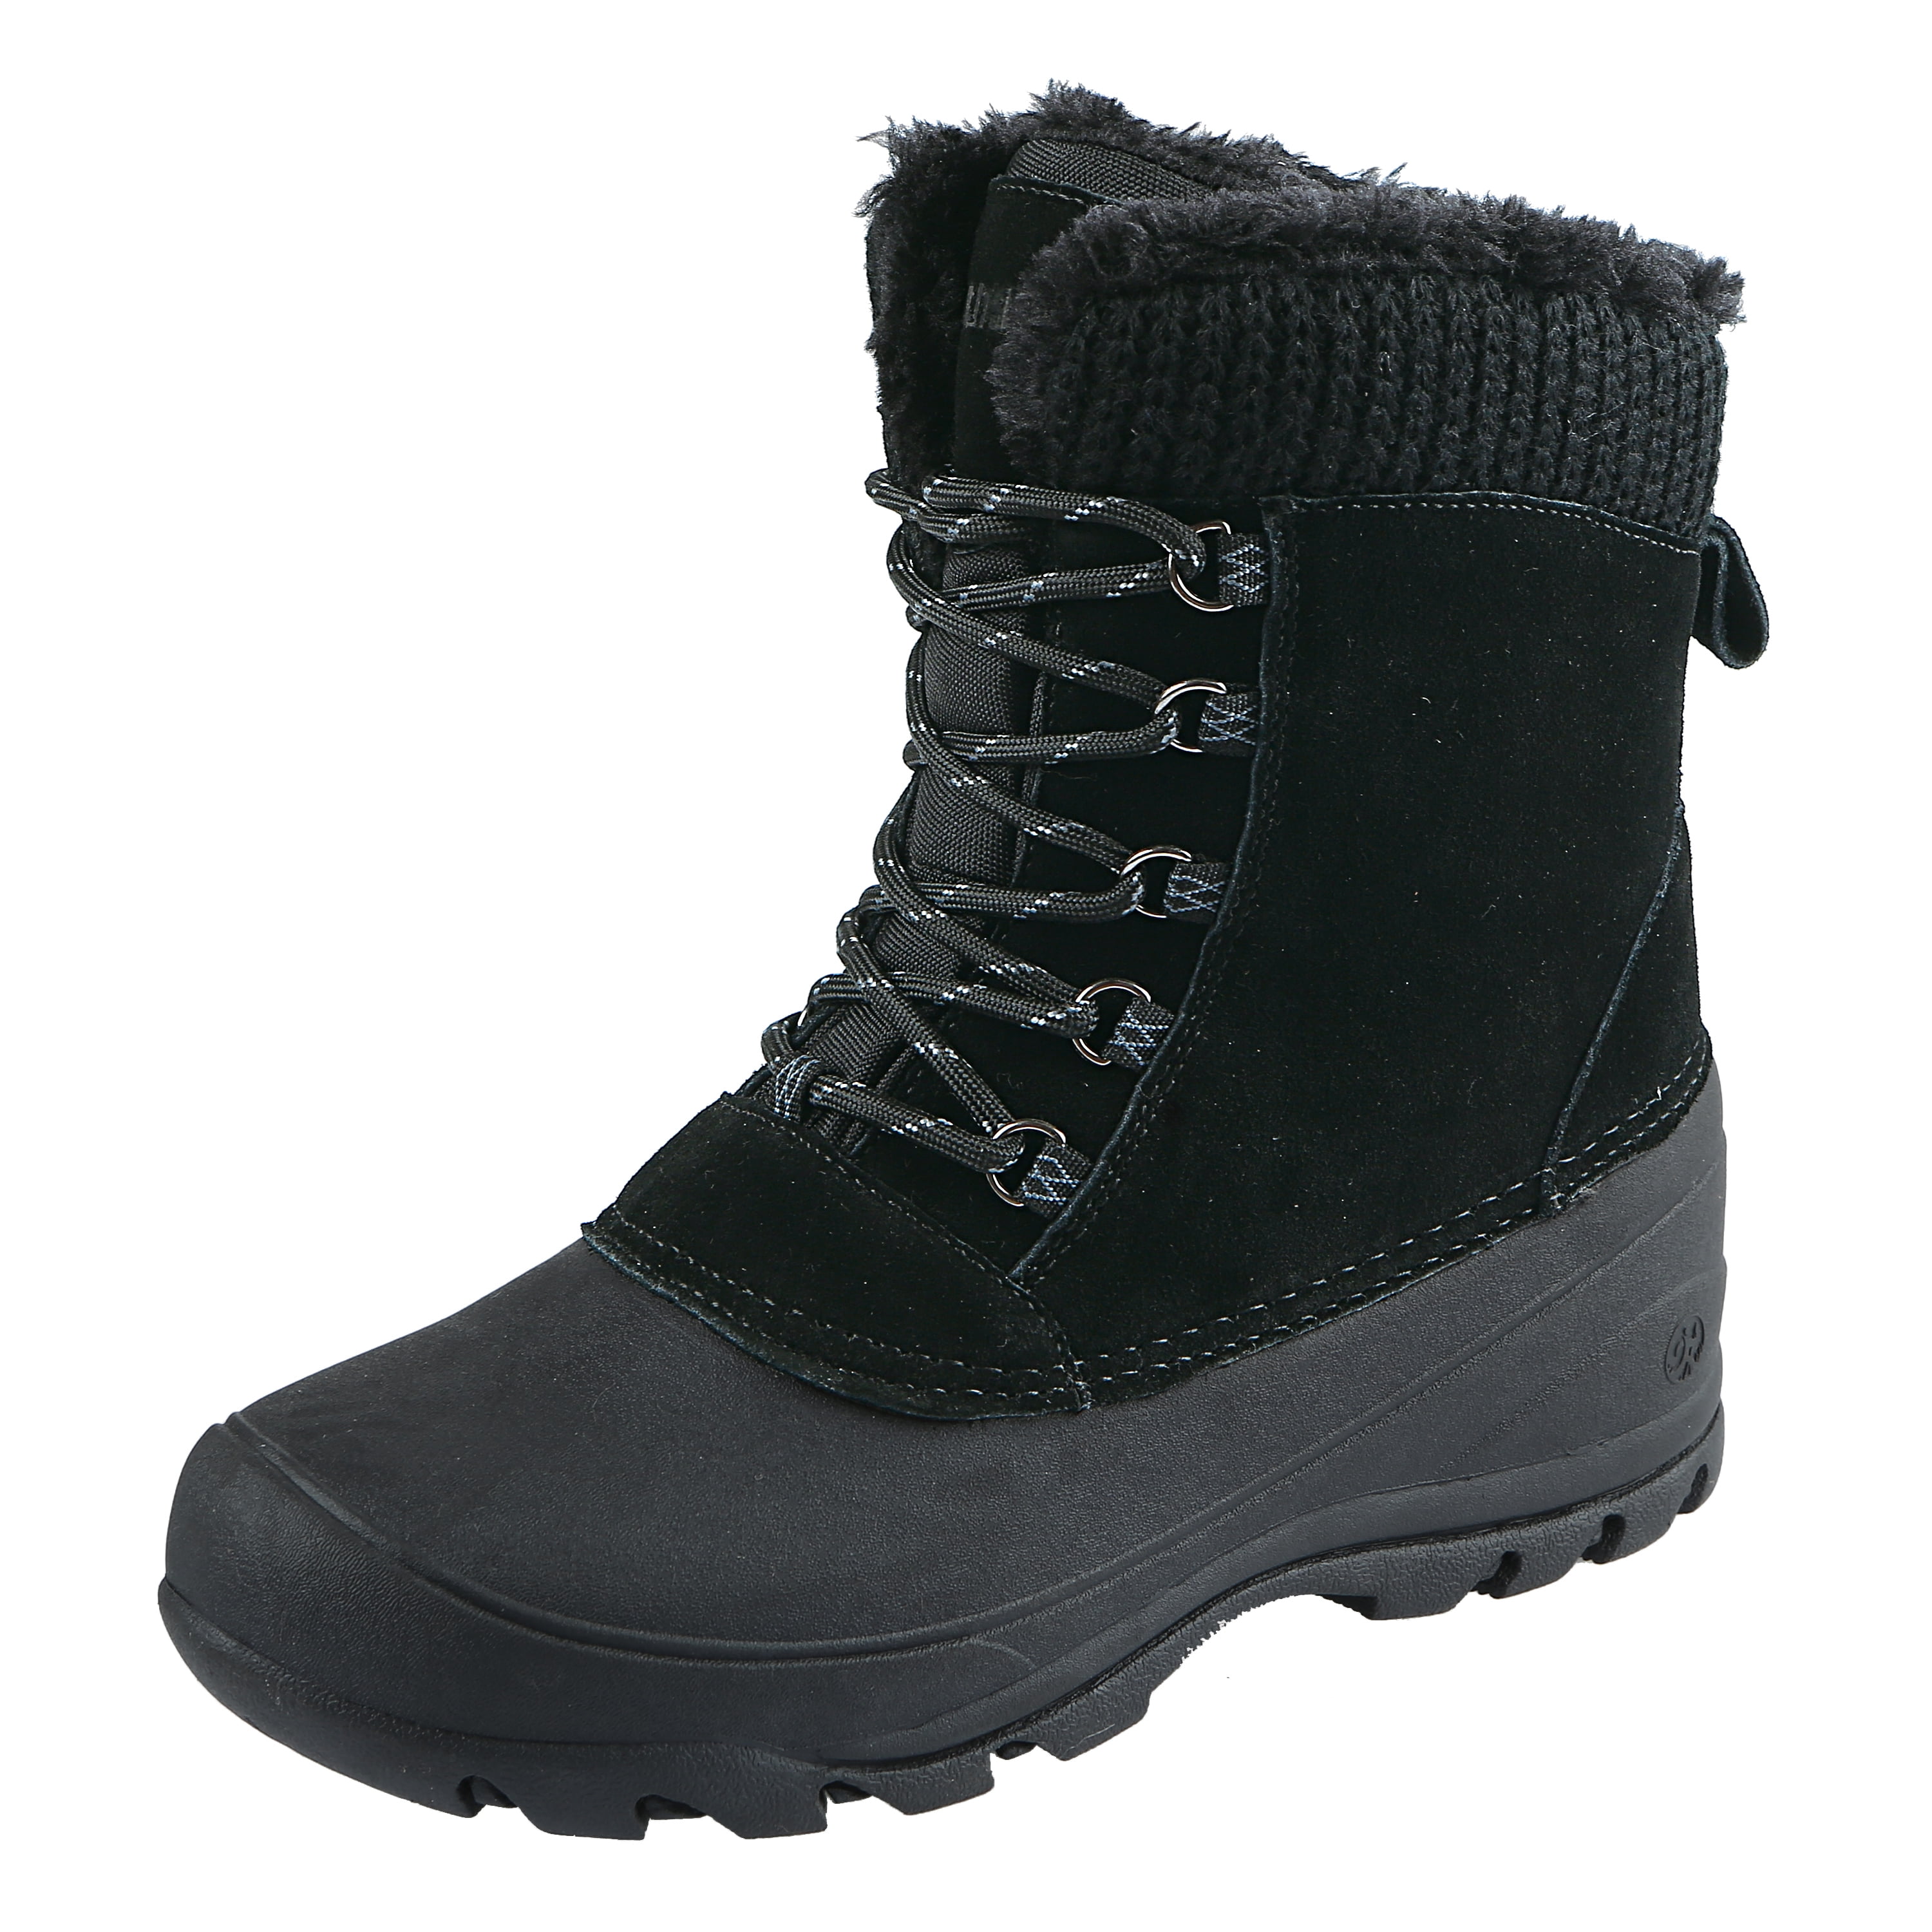 Northside - Northside Womens Ferndale Insulated Mid Calf Winter Snow ...